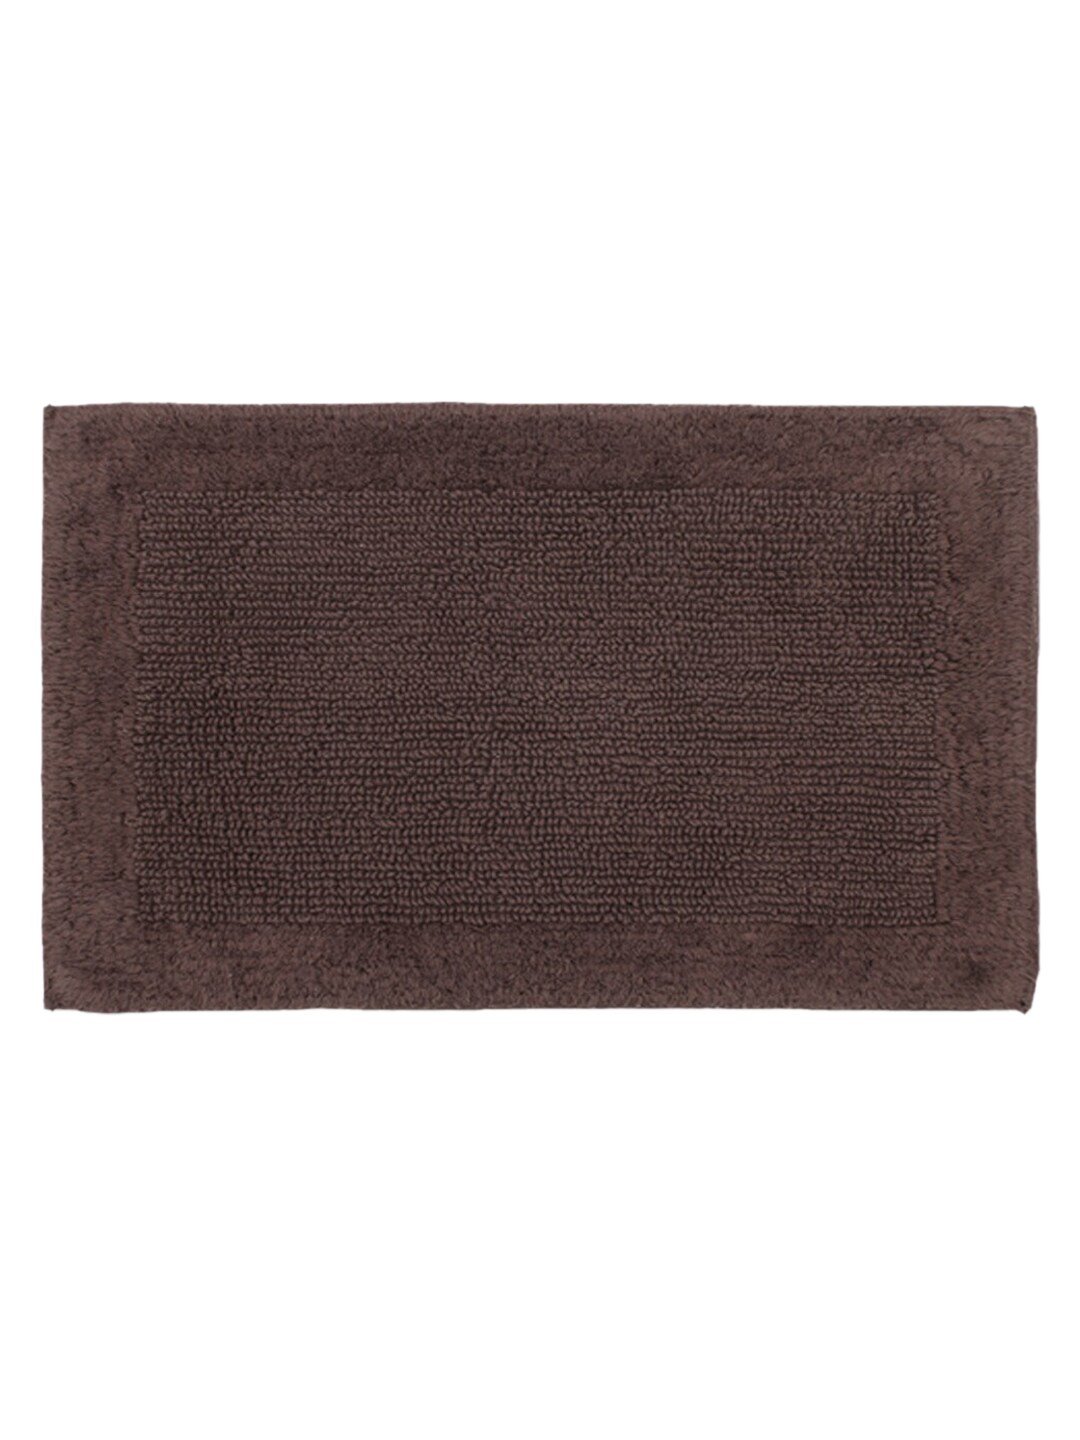 AVI Living Brown Solid Pure Cotton 1850 GSM Reversible Bath Rugs Price in India